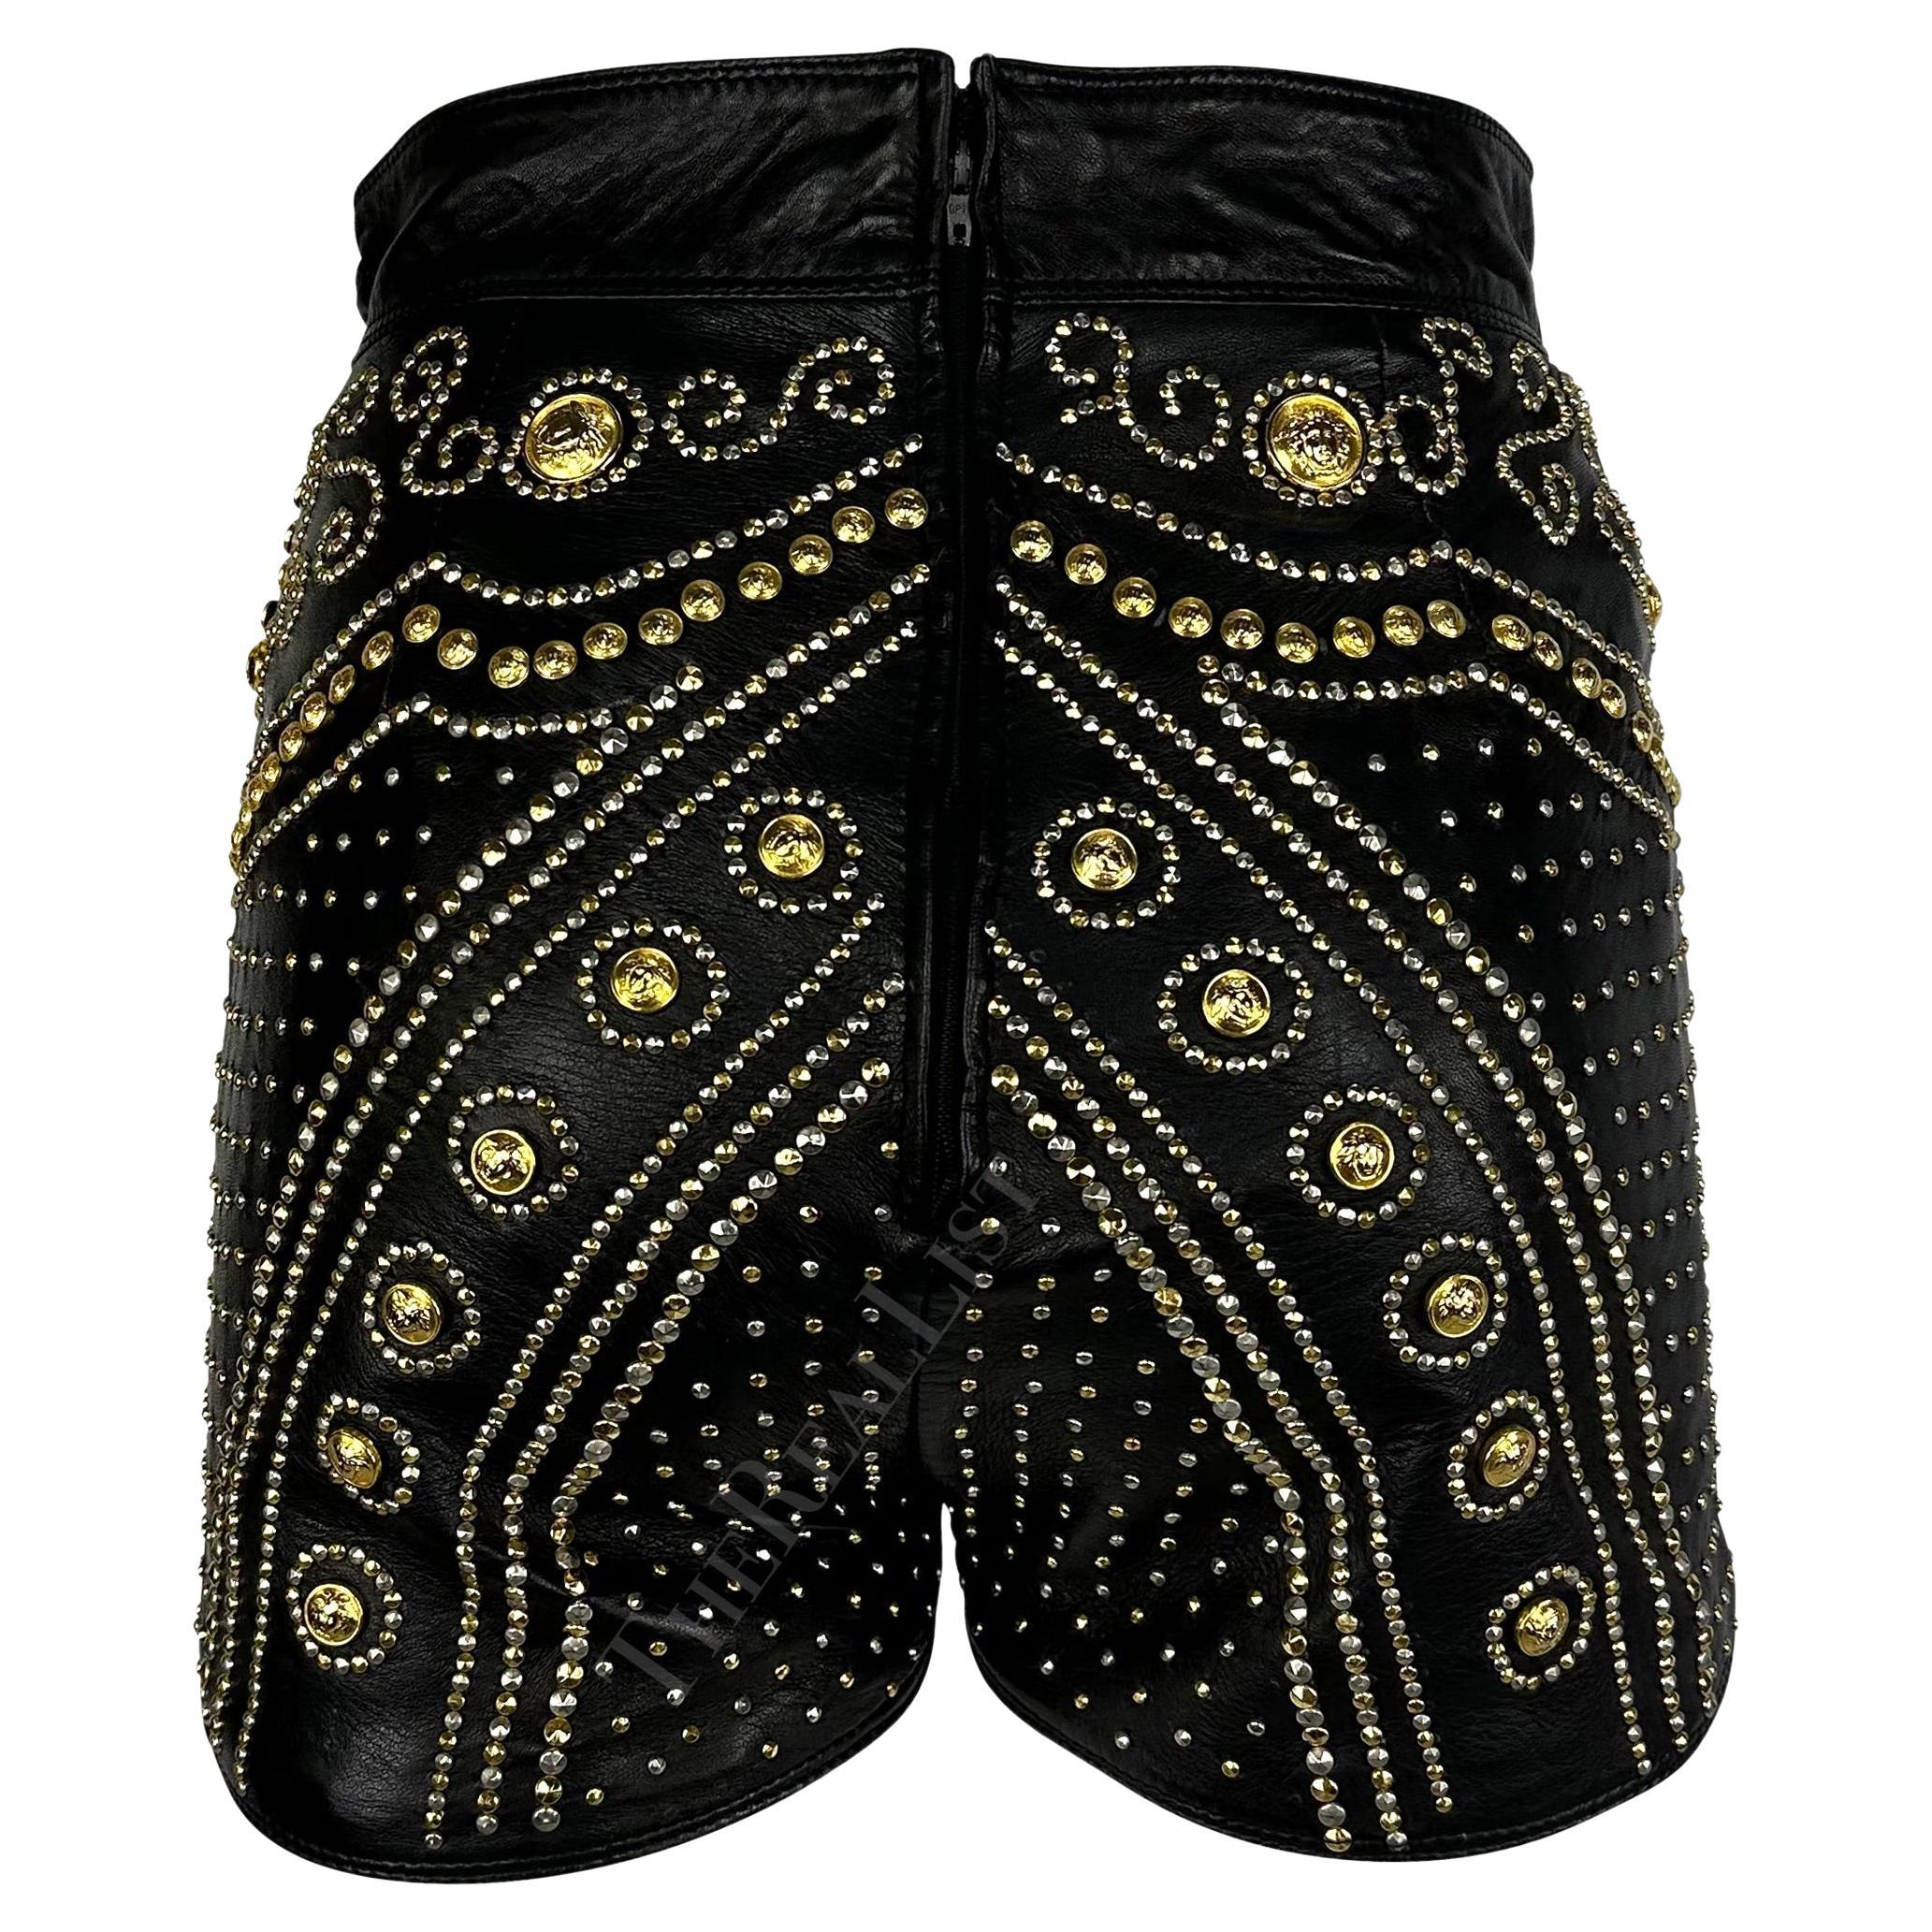 F/W 1992 Atelier Versace Haute Couture Runway Medusa Studded Leather Shorts For Sale 3